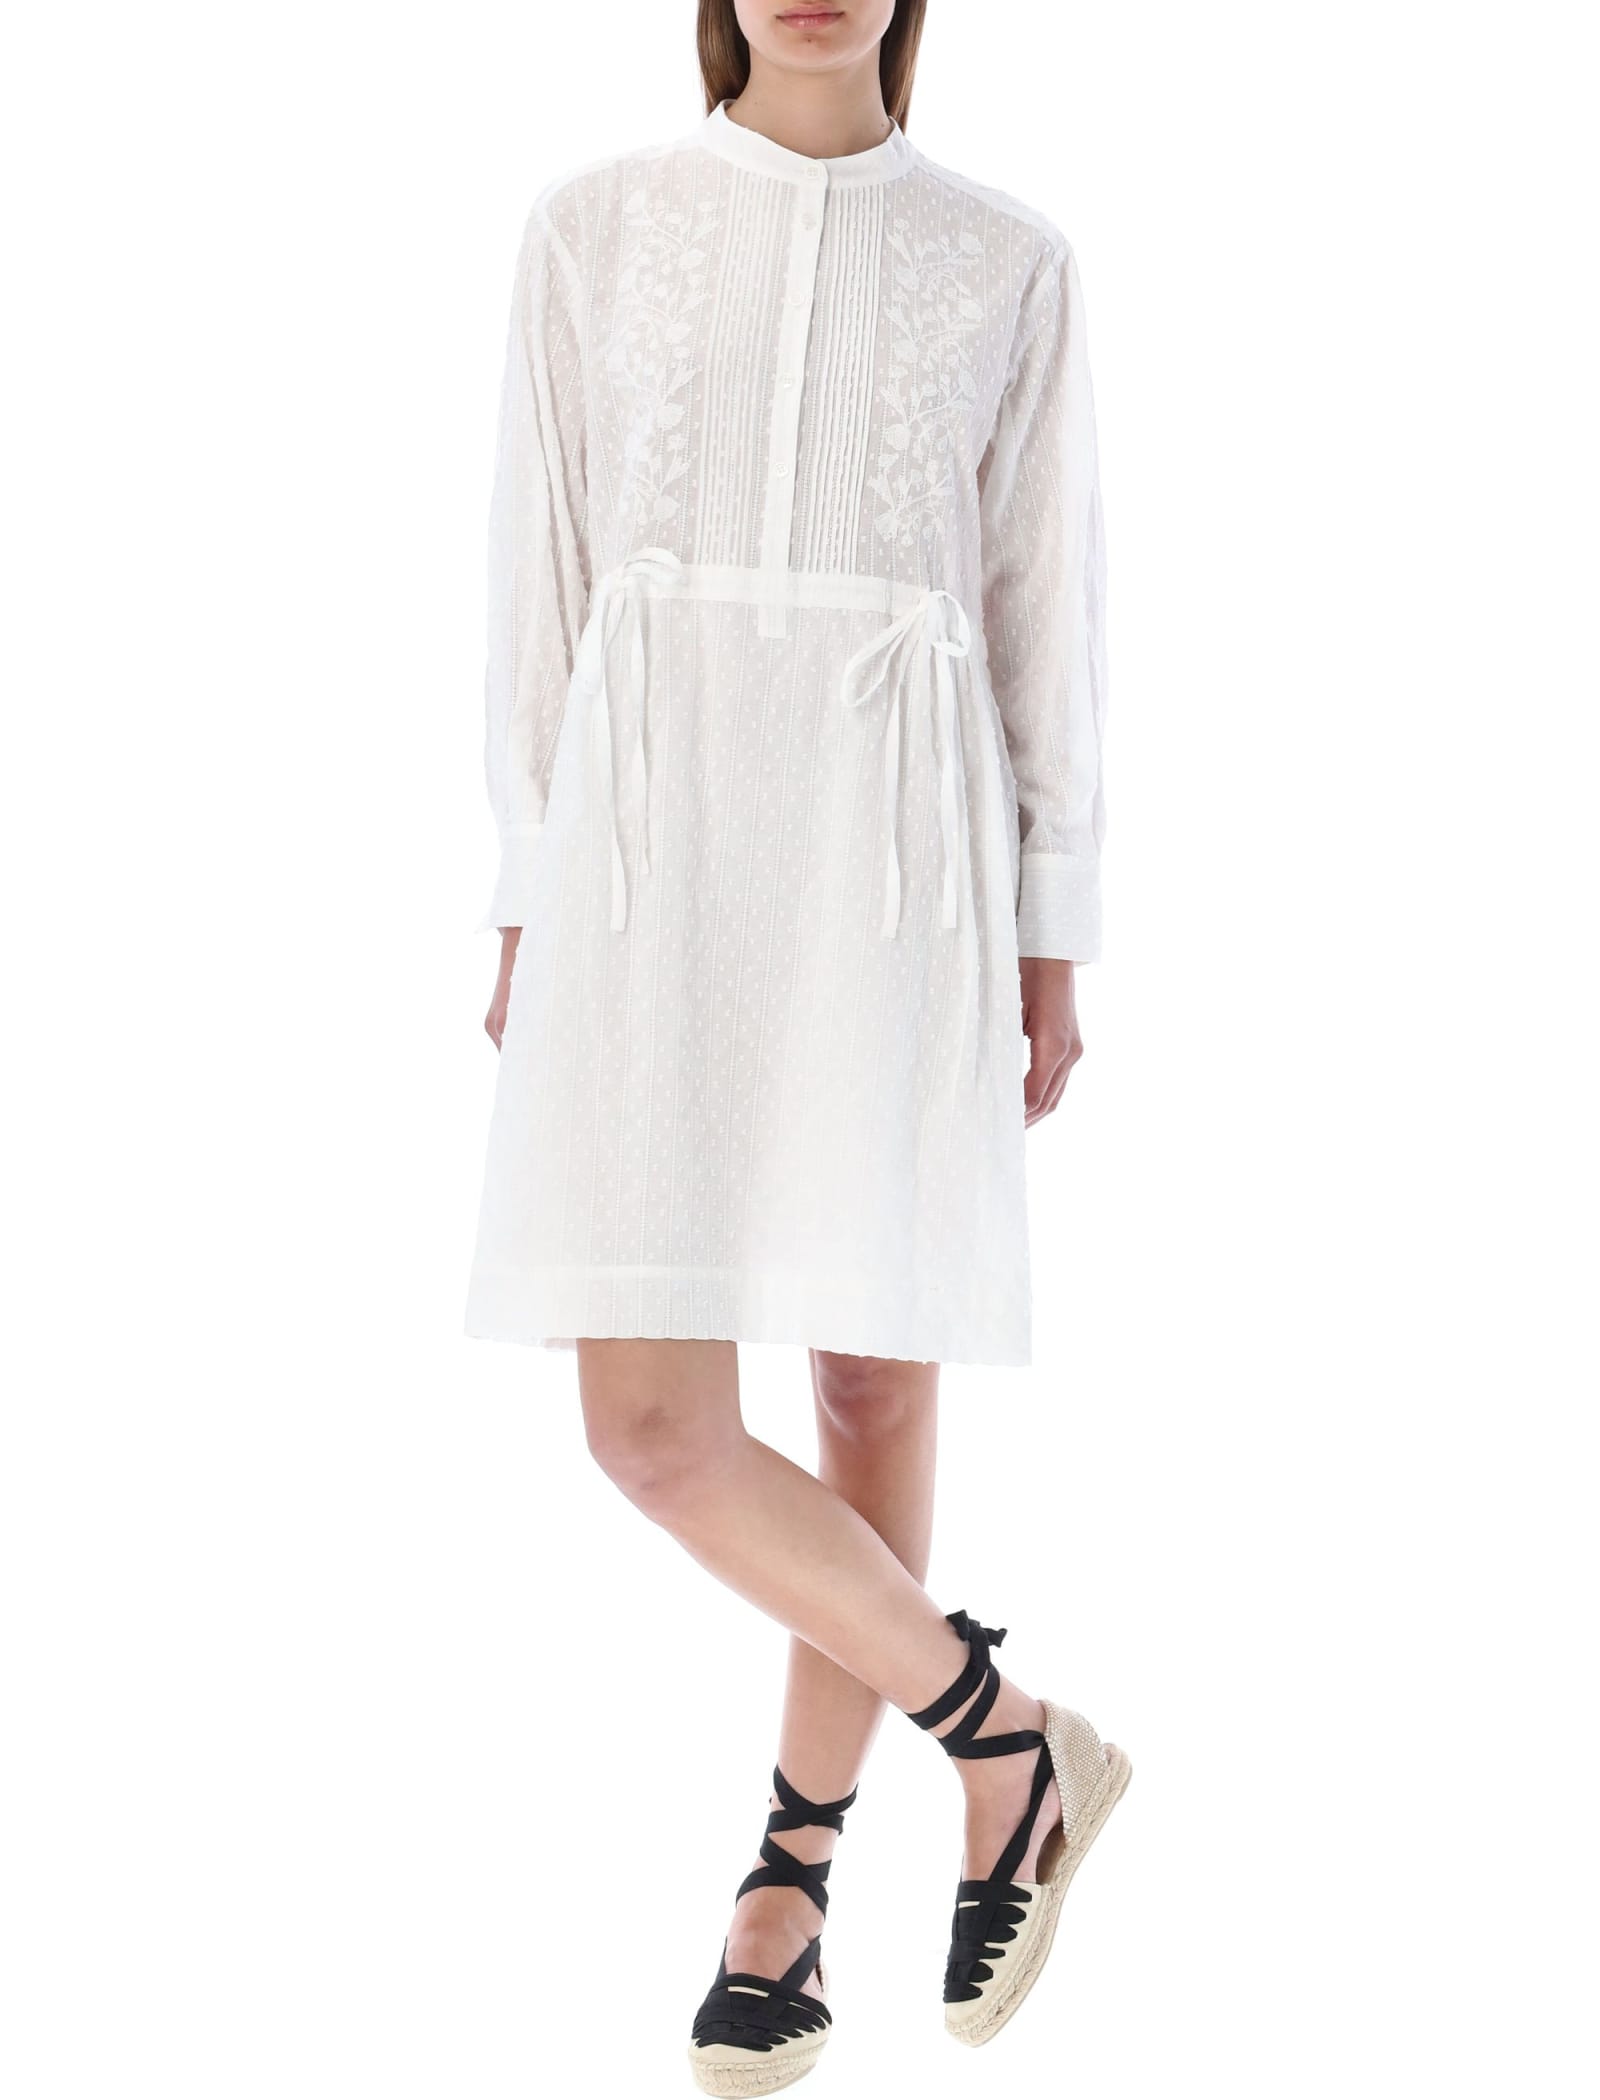 SEE BY CHLOÉ EMBROIDERED SHIRT DRESS